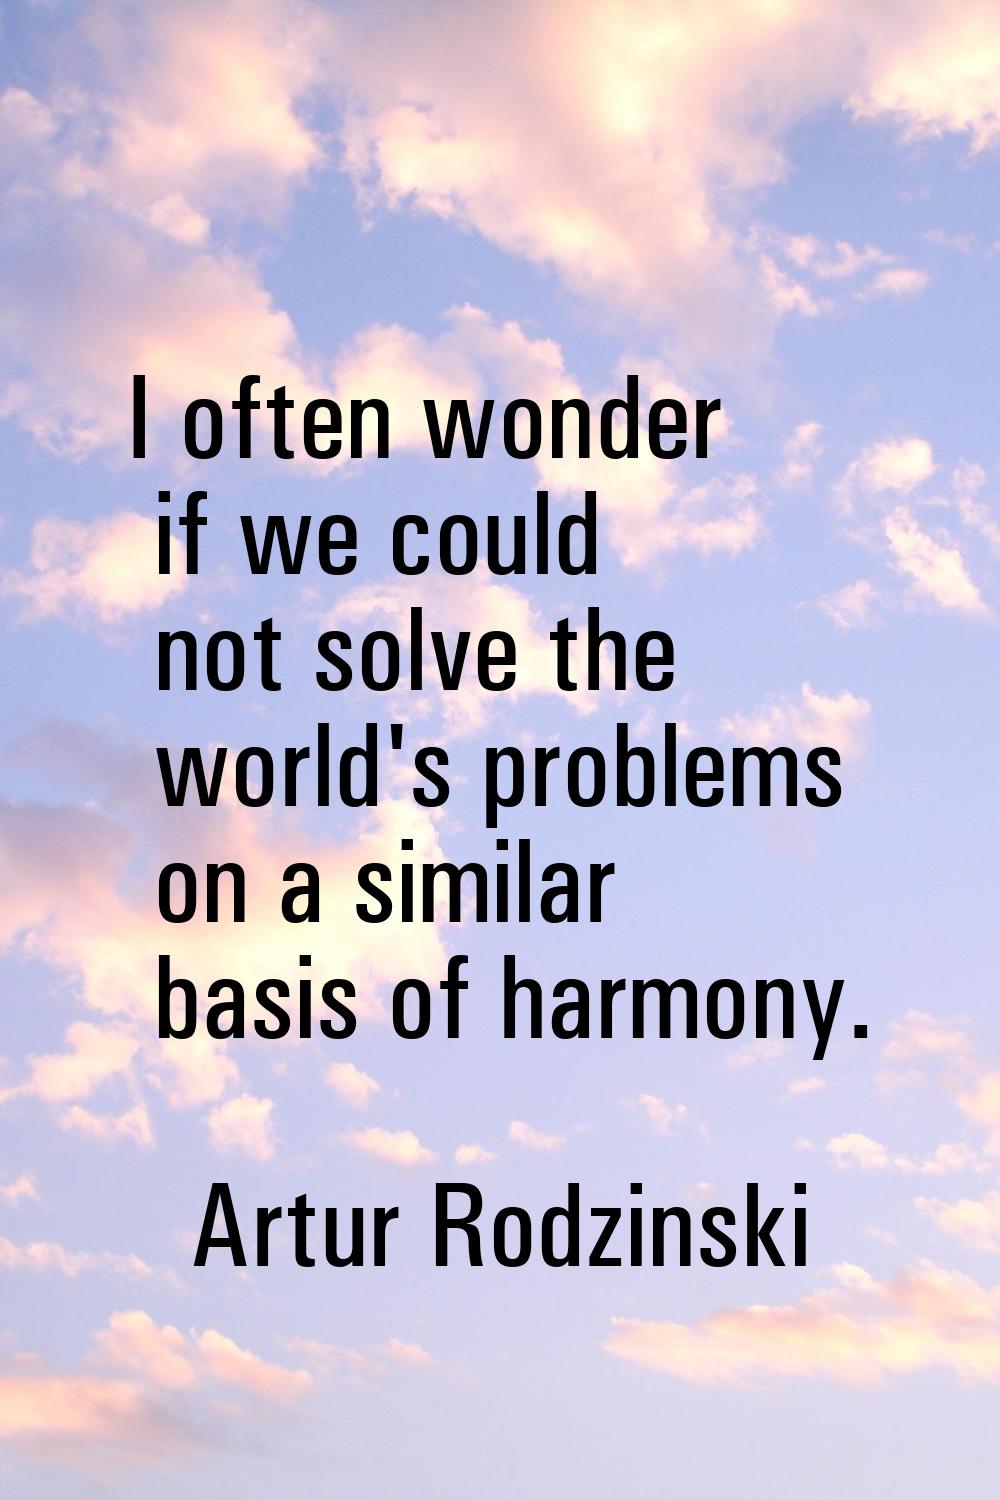 I often wonder if we could not solve the world's problems on a similar basis of harmony.